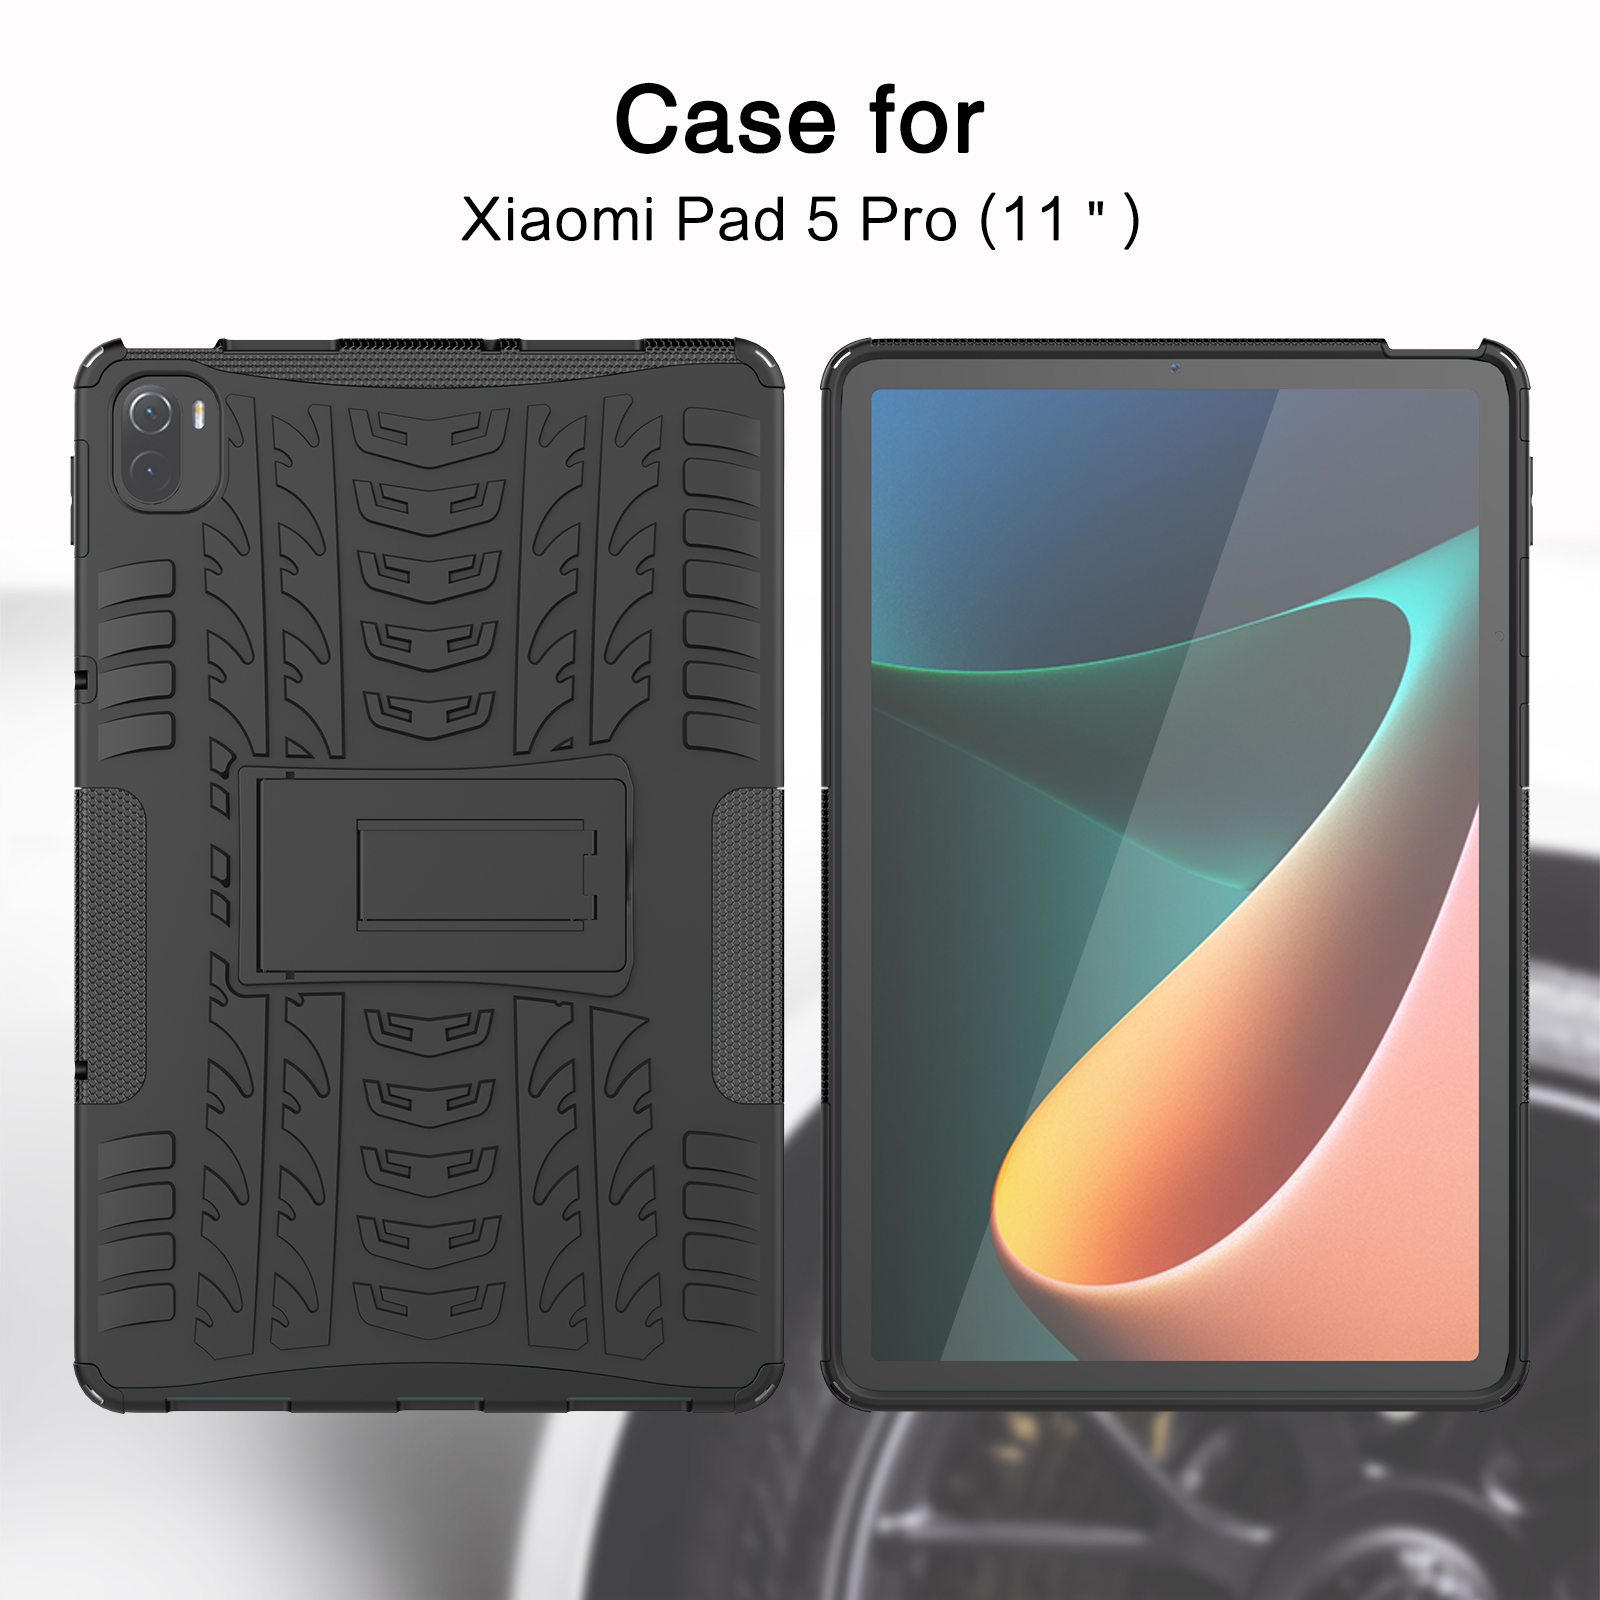 Dazzle Xiaomi Mi Pad 5 / Tab Mipad 5 Pro Rugged Case Defender Stand Armor / Hybrid Cover / Shockproof Case Aman Tahan Banting